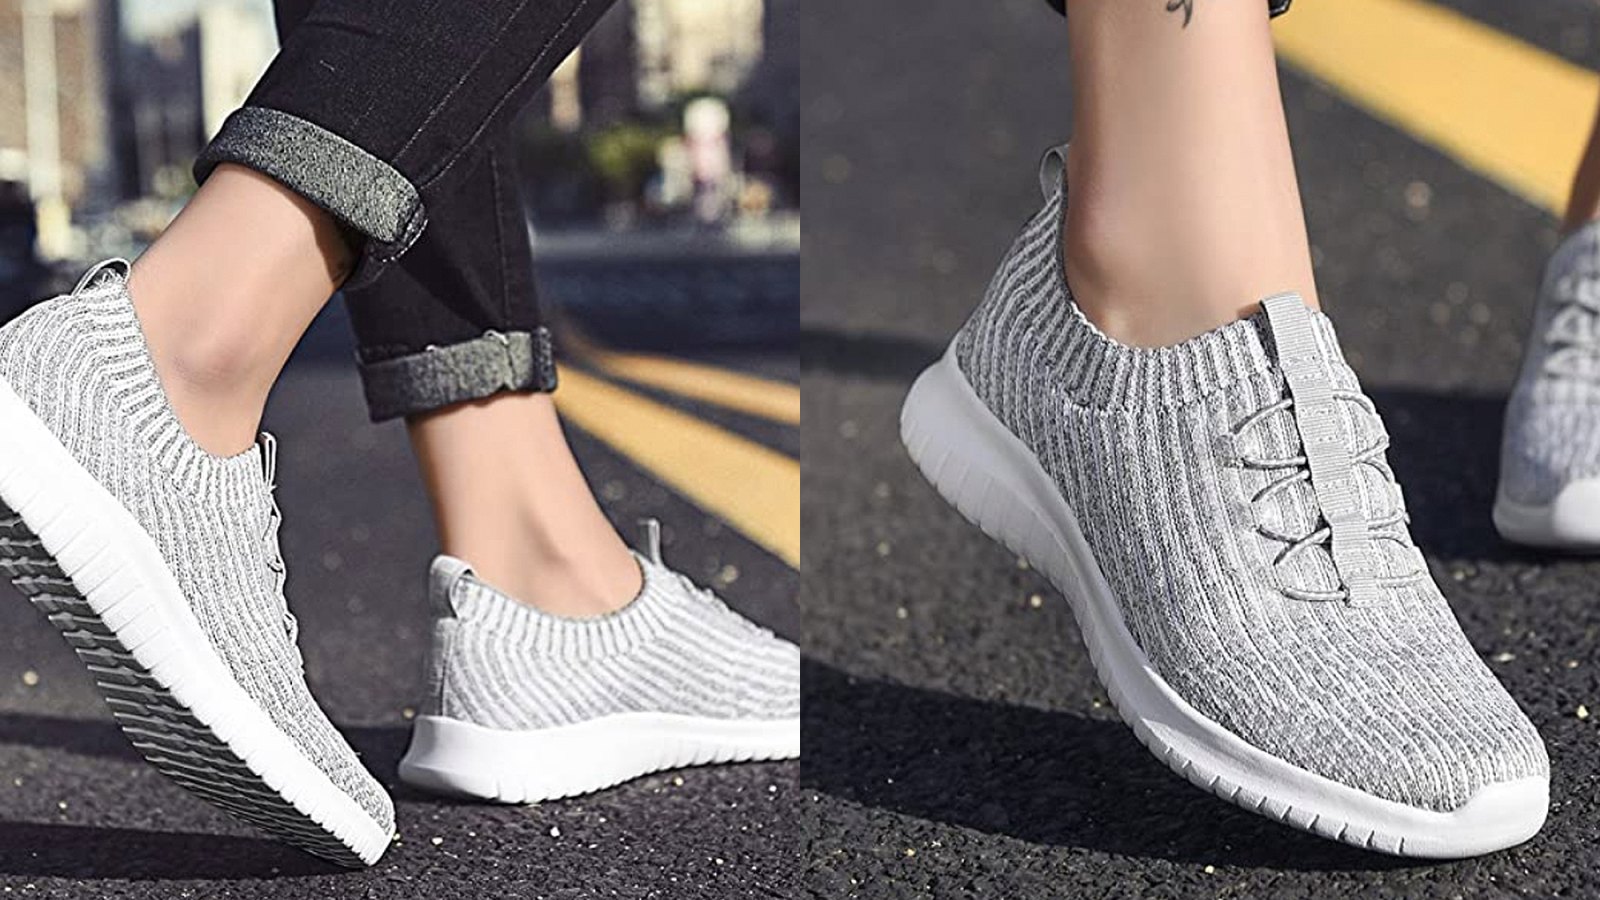 Tiosebon Sneakers Are So Comfy That You Don’t Need to Wear Socks